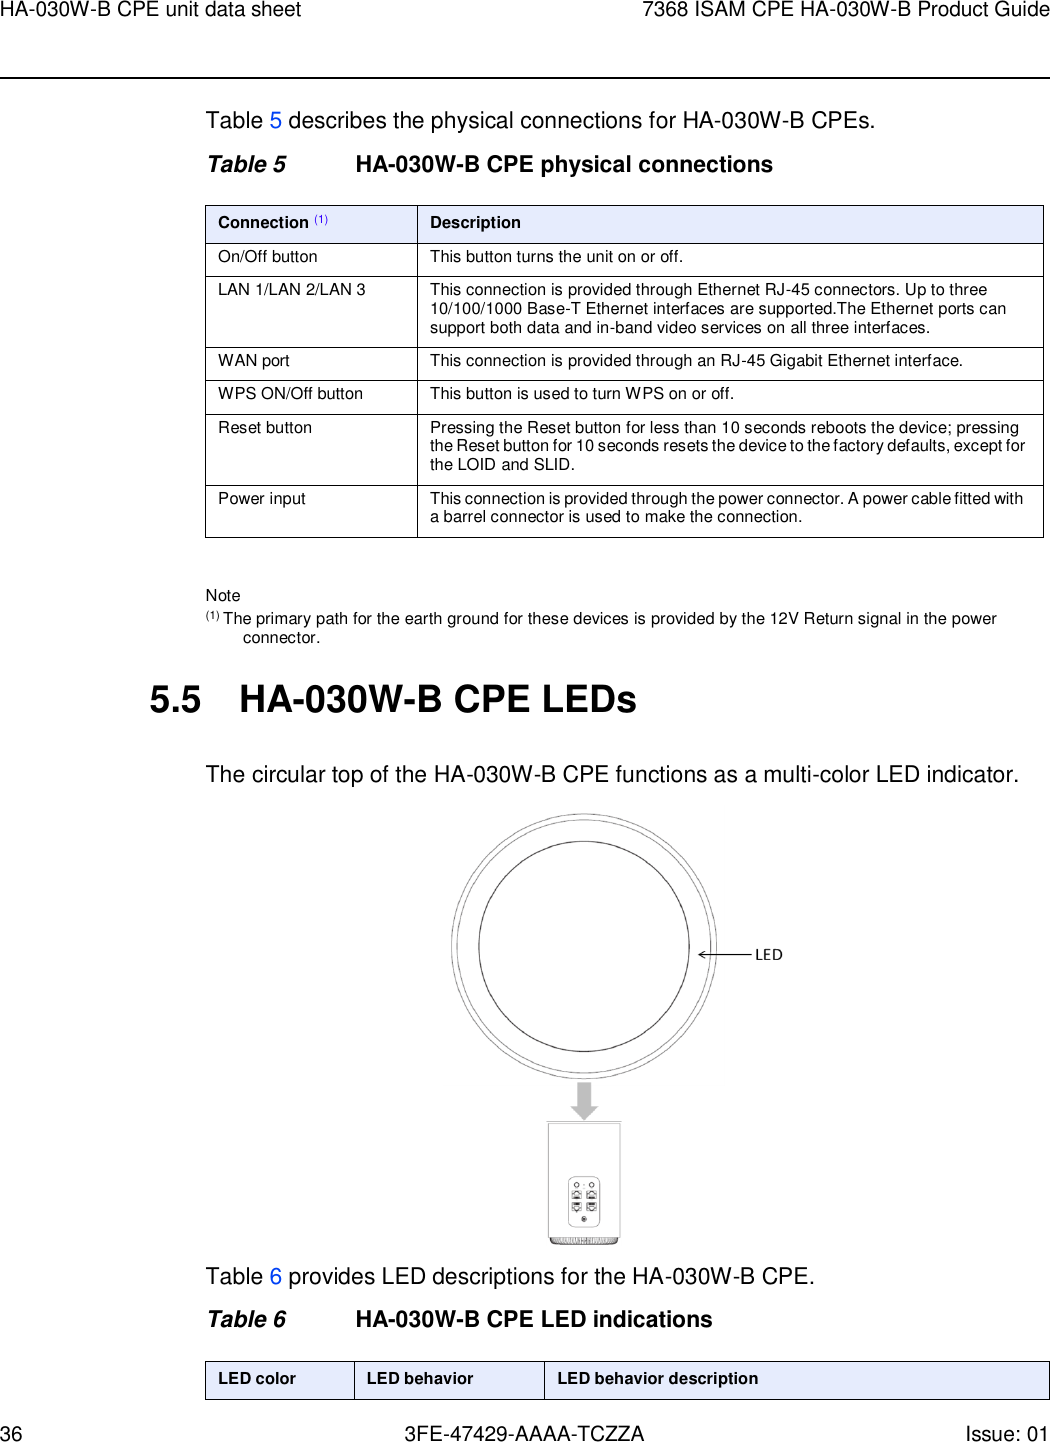 36 3FE-47429-AAAA-TCZZA Issue: 01 HA-030W-B CPE unit data sheet 7368 ISAM CPE HA-030W-B Product Guide    Table 5 describes the physical connections for HA-030W-B CPEs. Table 5  HA-030W-B CPE physical connections  Connection (1) Description On/Off button This button turns the unit on or off. LAN 1/LAN 2/LAN 3 This connection is provided through Ethernet RJ-45 connectors. Up to three 10/100/1000 Base-T Ethernet interfaces are supported.The Ethernet ports can support both data and in-band video services on all three interfaces. WAN port This connection is provided through an RJ-45 Gigabit Ethernet interface. WPS ON/Off button This button is used to turn WPS on or off. Reset button Pressing the Reset button for less than 10 seconds reboots the device; pressing the Reset button for 10 seconds resets the device to the factory defaults, except for the LOID and SLID. Power input This connection is provided through the power connector. A power cable fitted with a barrel connector is used to make the connection.  Note (1) The primary path for the earth ground for these devices is provided by the 12V Return signal in the power connector.  5.5  HA-030W-B CPE LEDs  The circular top of the HA-030W-B CPE functions as a multi-color LED indicator.   Table 6 provides LED descriptions for the HA-030W-B CPE. Table 6  HA-030W-B CPE LED indications  LED color LED behavior LED behavior description 